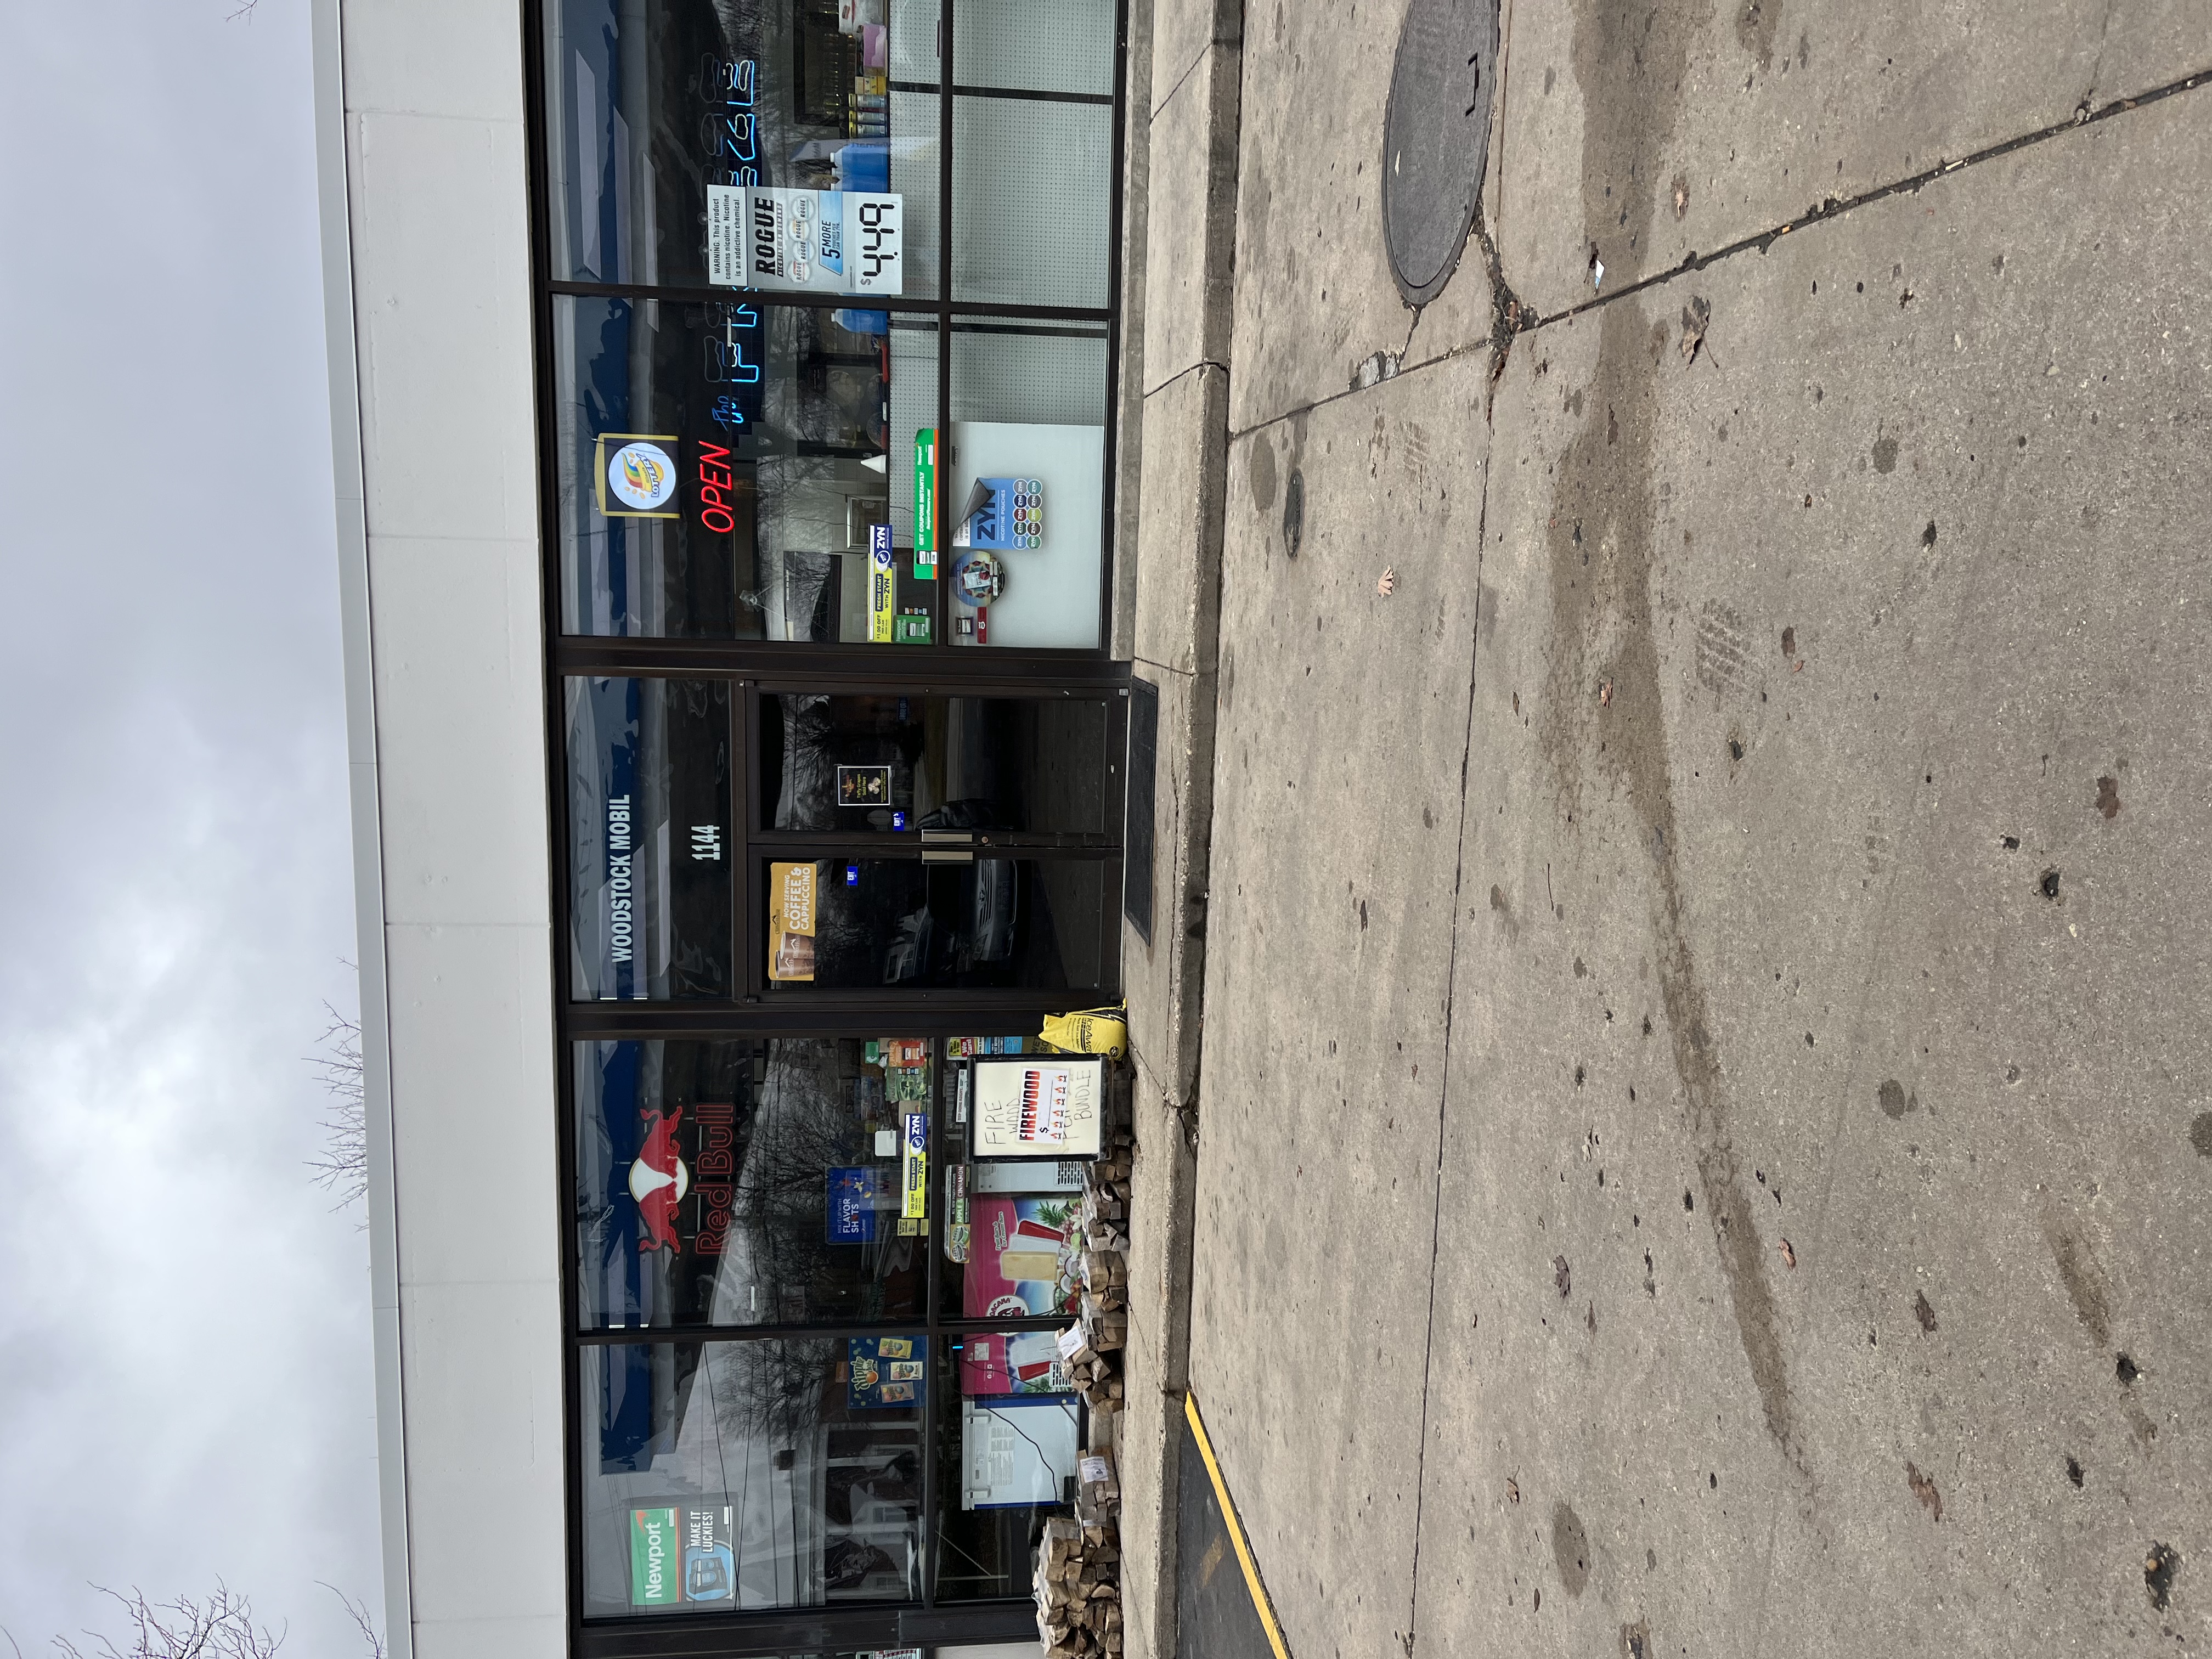 Getcoins - Bitcoin ATM - Inside of Mobil in Woodstock, Illinois